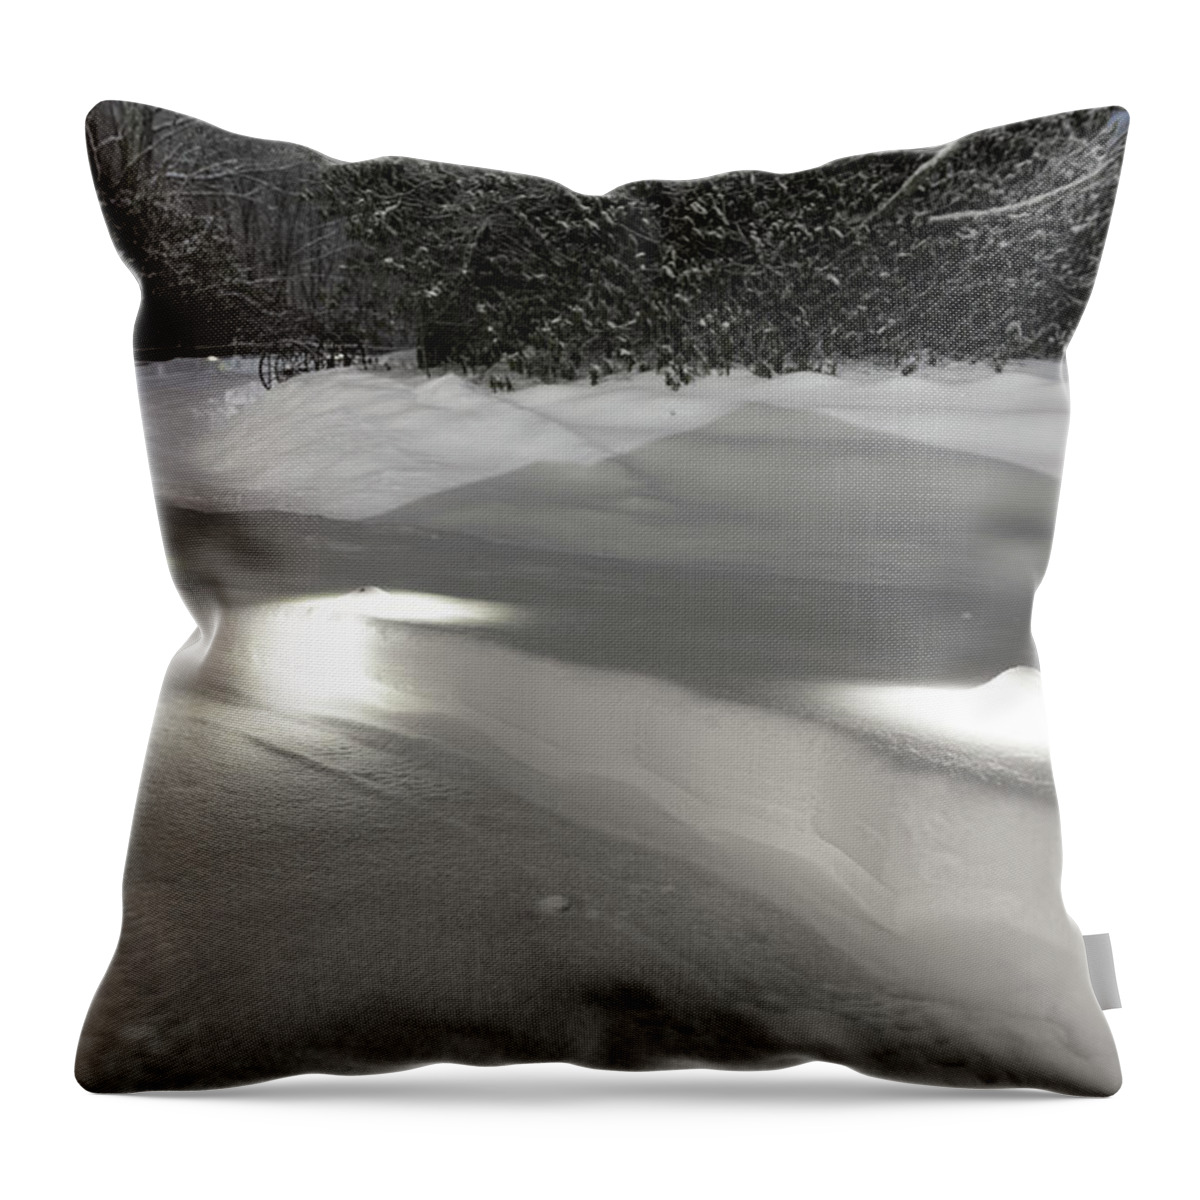 Snow Throw Pillow featuring the photograph Glowing Landscape Lighting by D K Wall